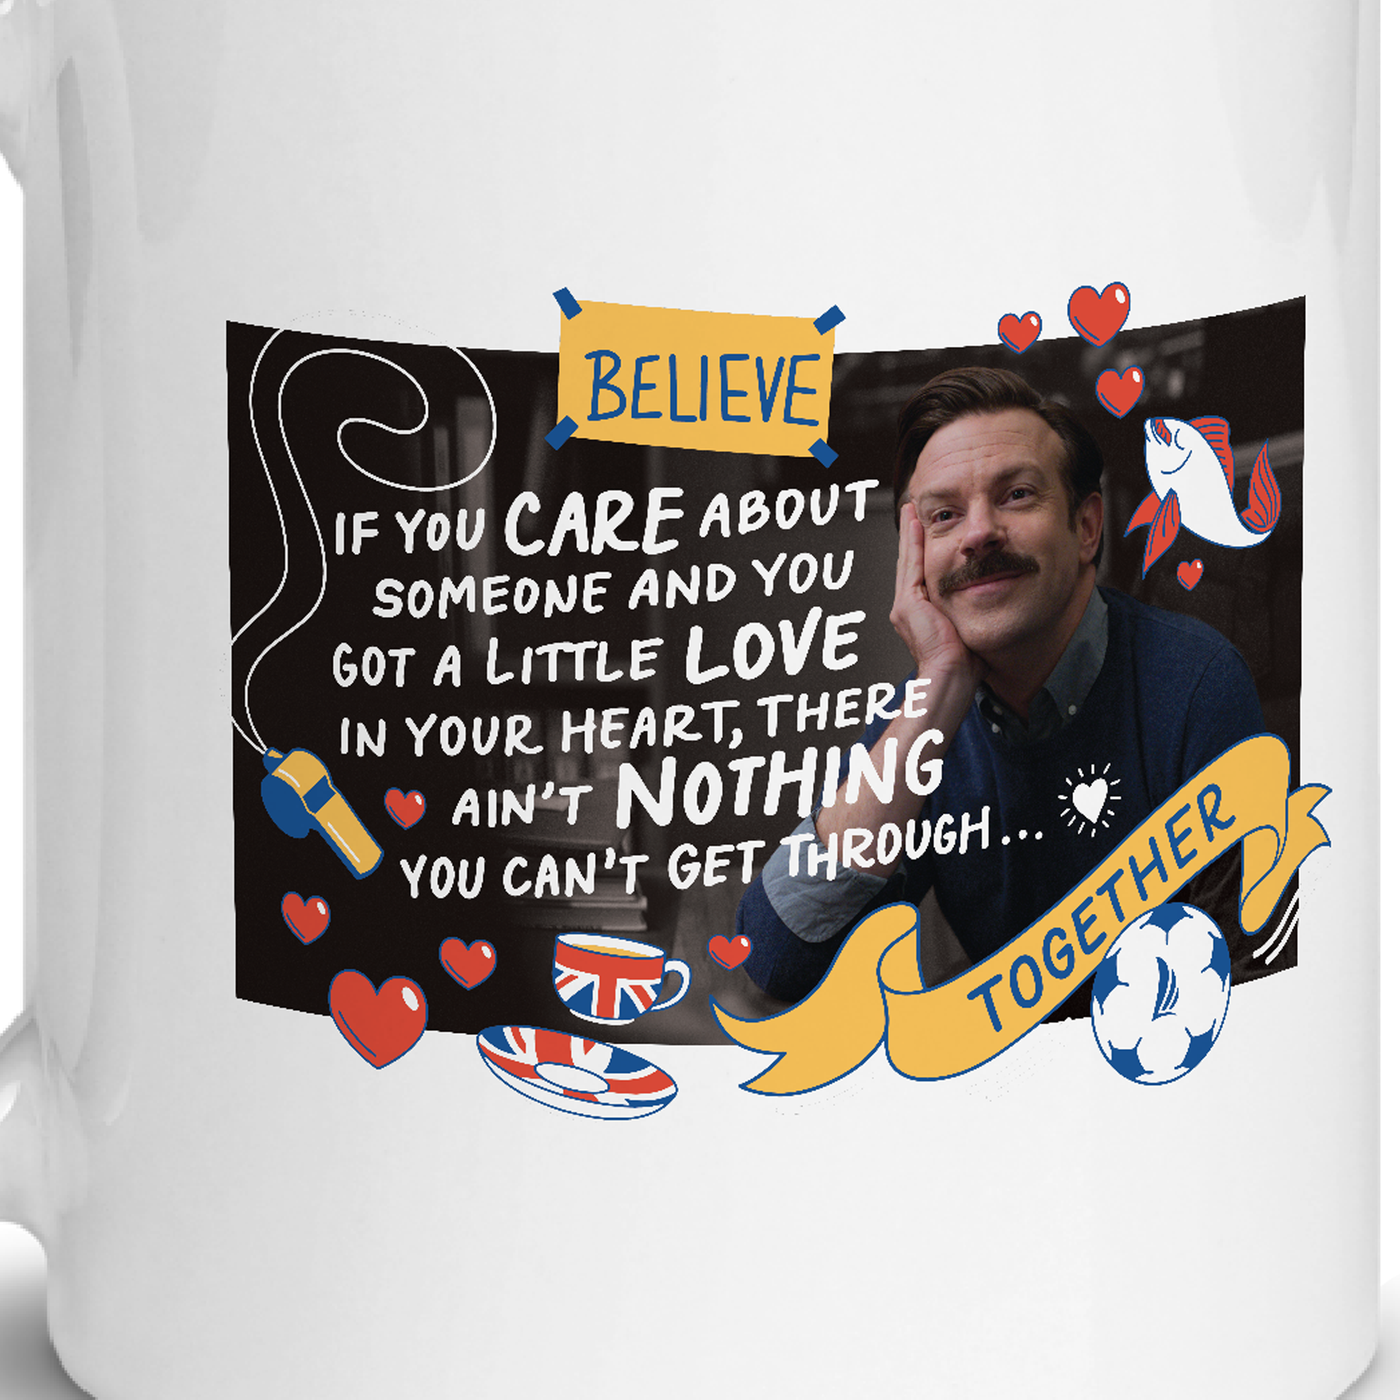 Ted Lasso Love In Your Heart Two-Tone Mug